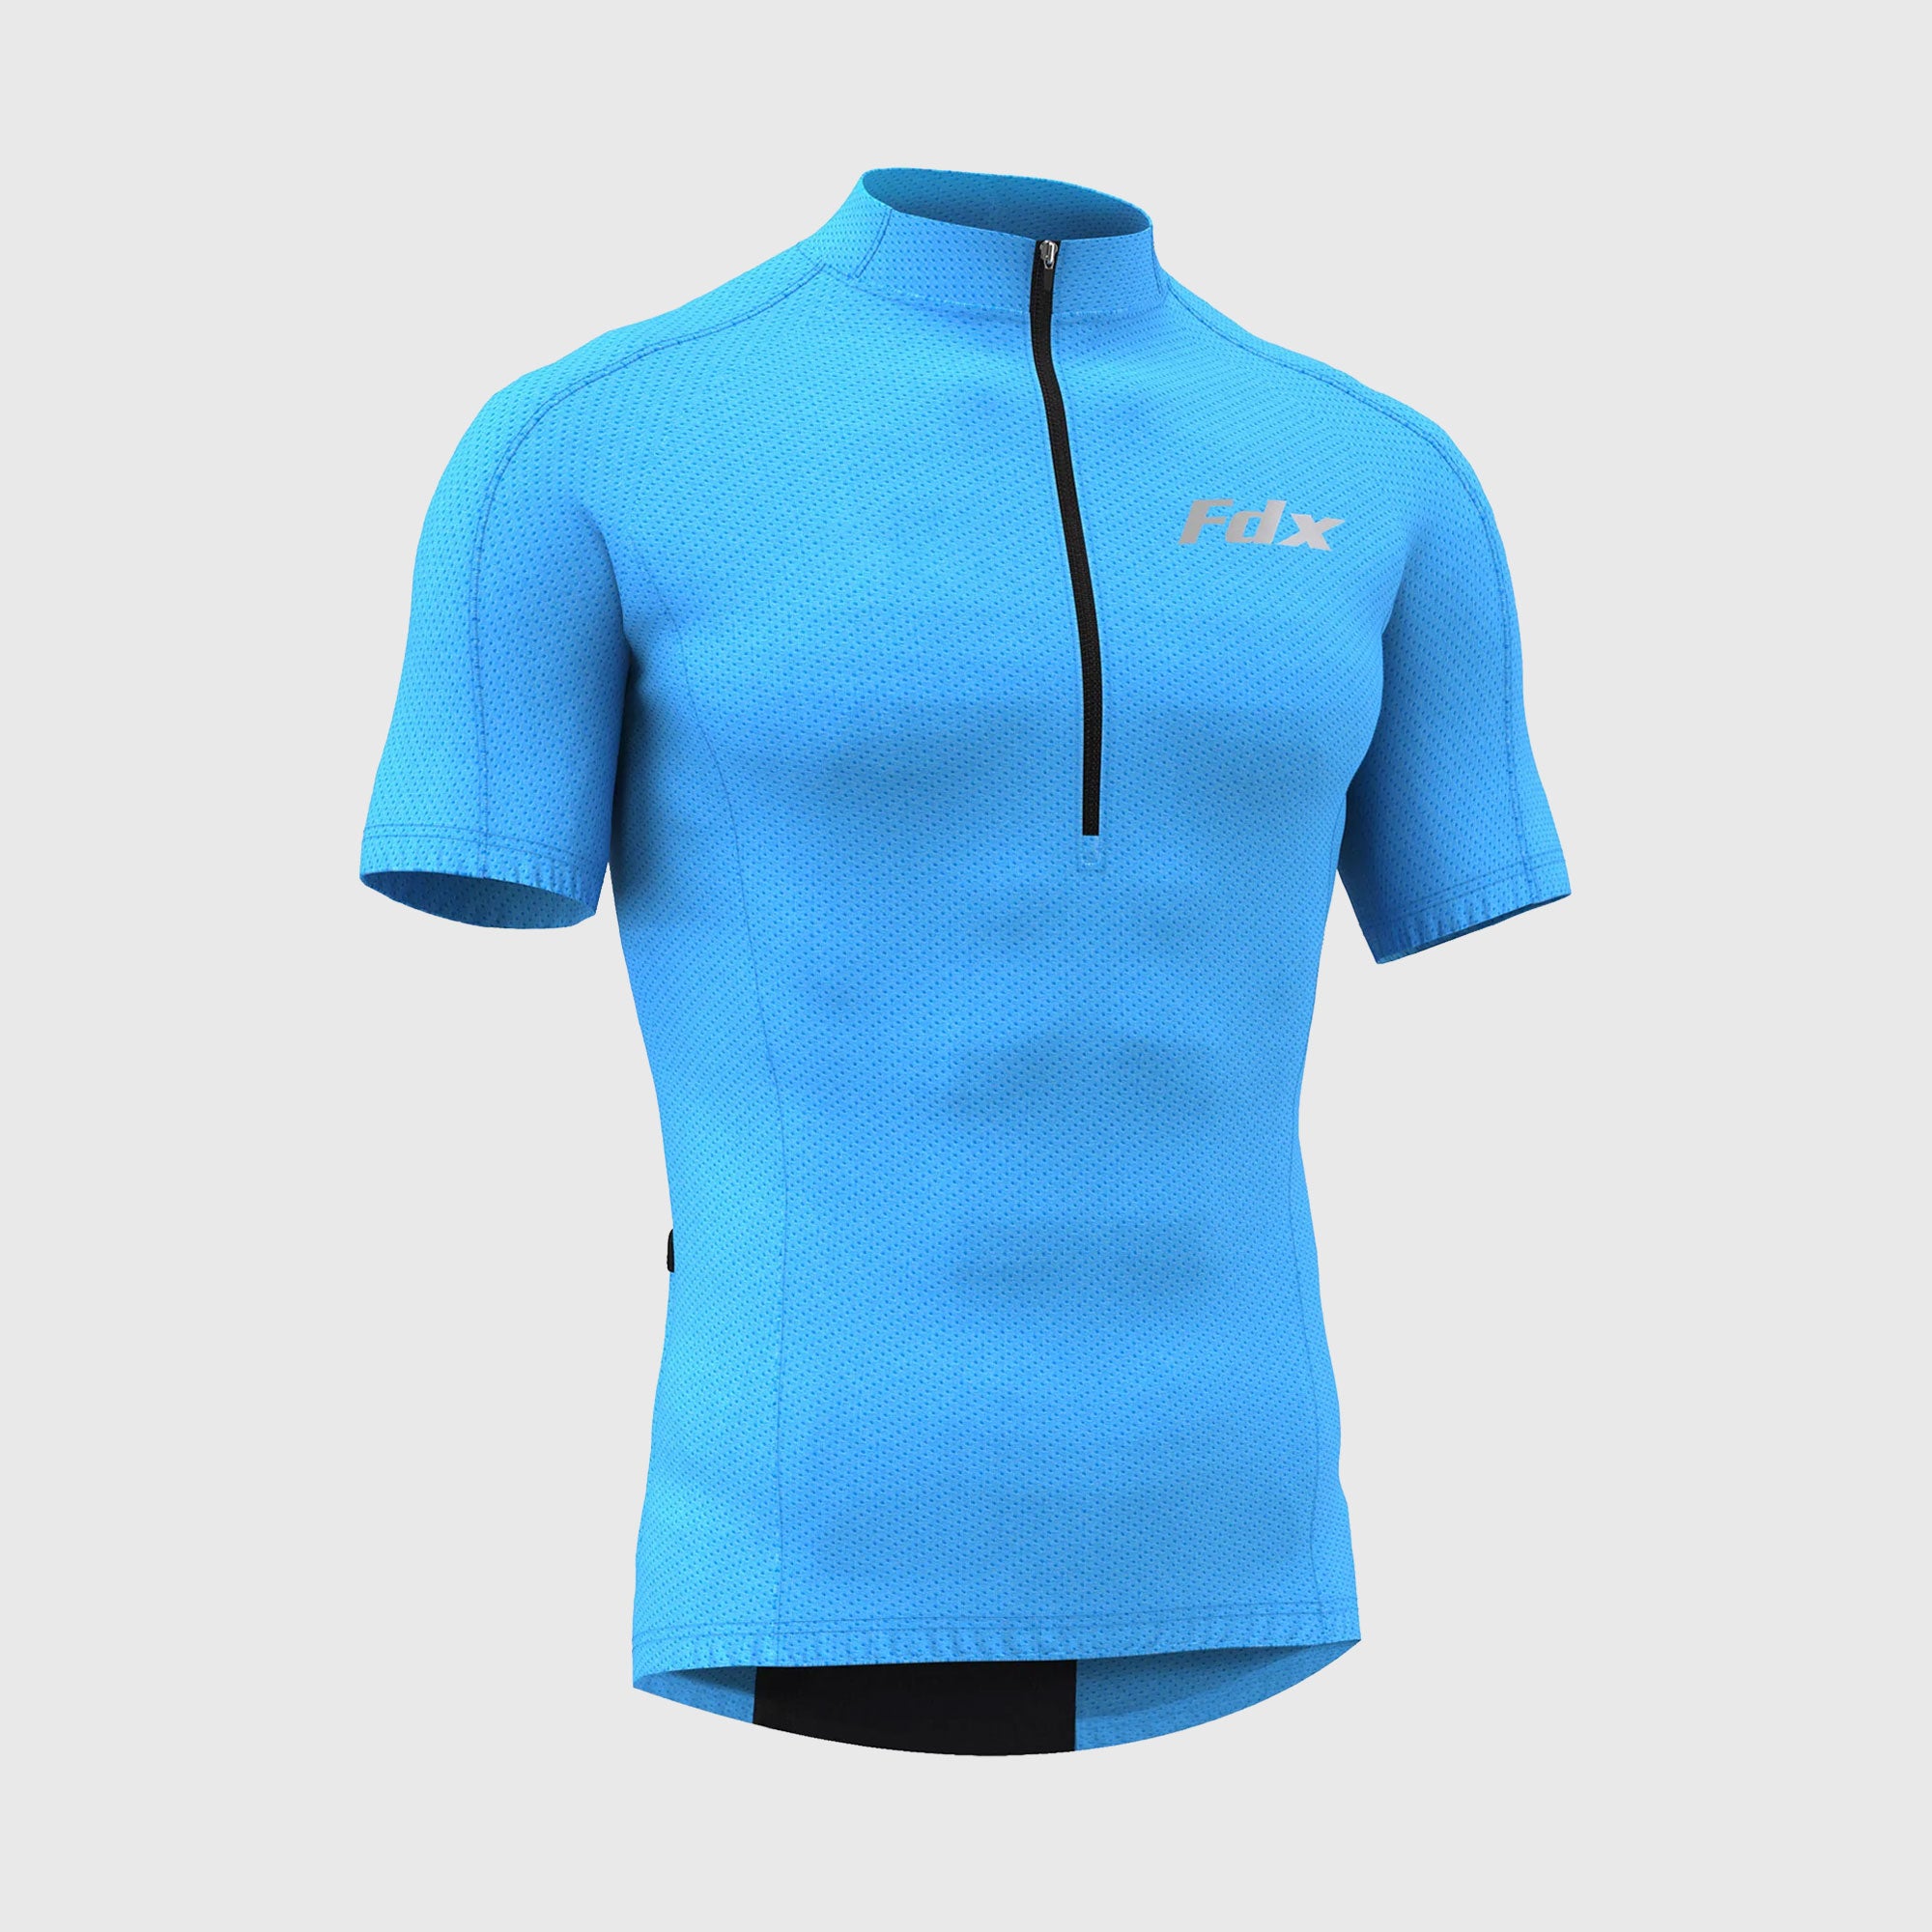 Fdx men’s blue best short sleeves cycling jersey breathable lightweight hi-viz Reflective details summer biking top, full zip skin friendly half sleeves mesh cycling shirt for indoor & outdoor riding with two back & 1 zip pockets